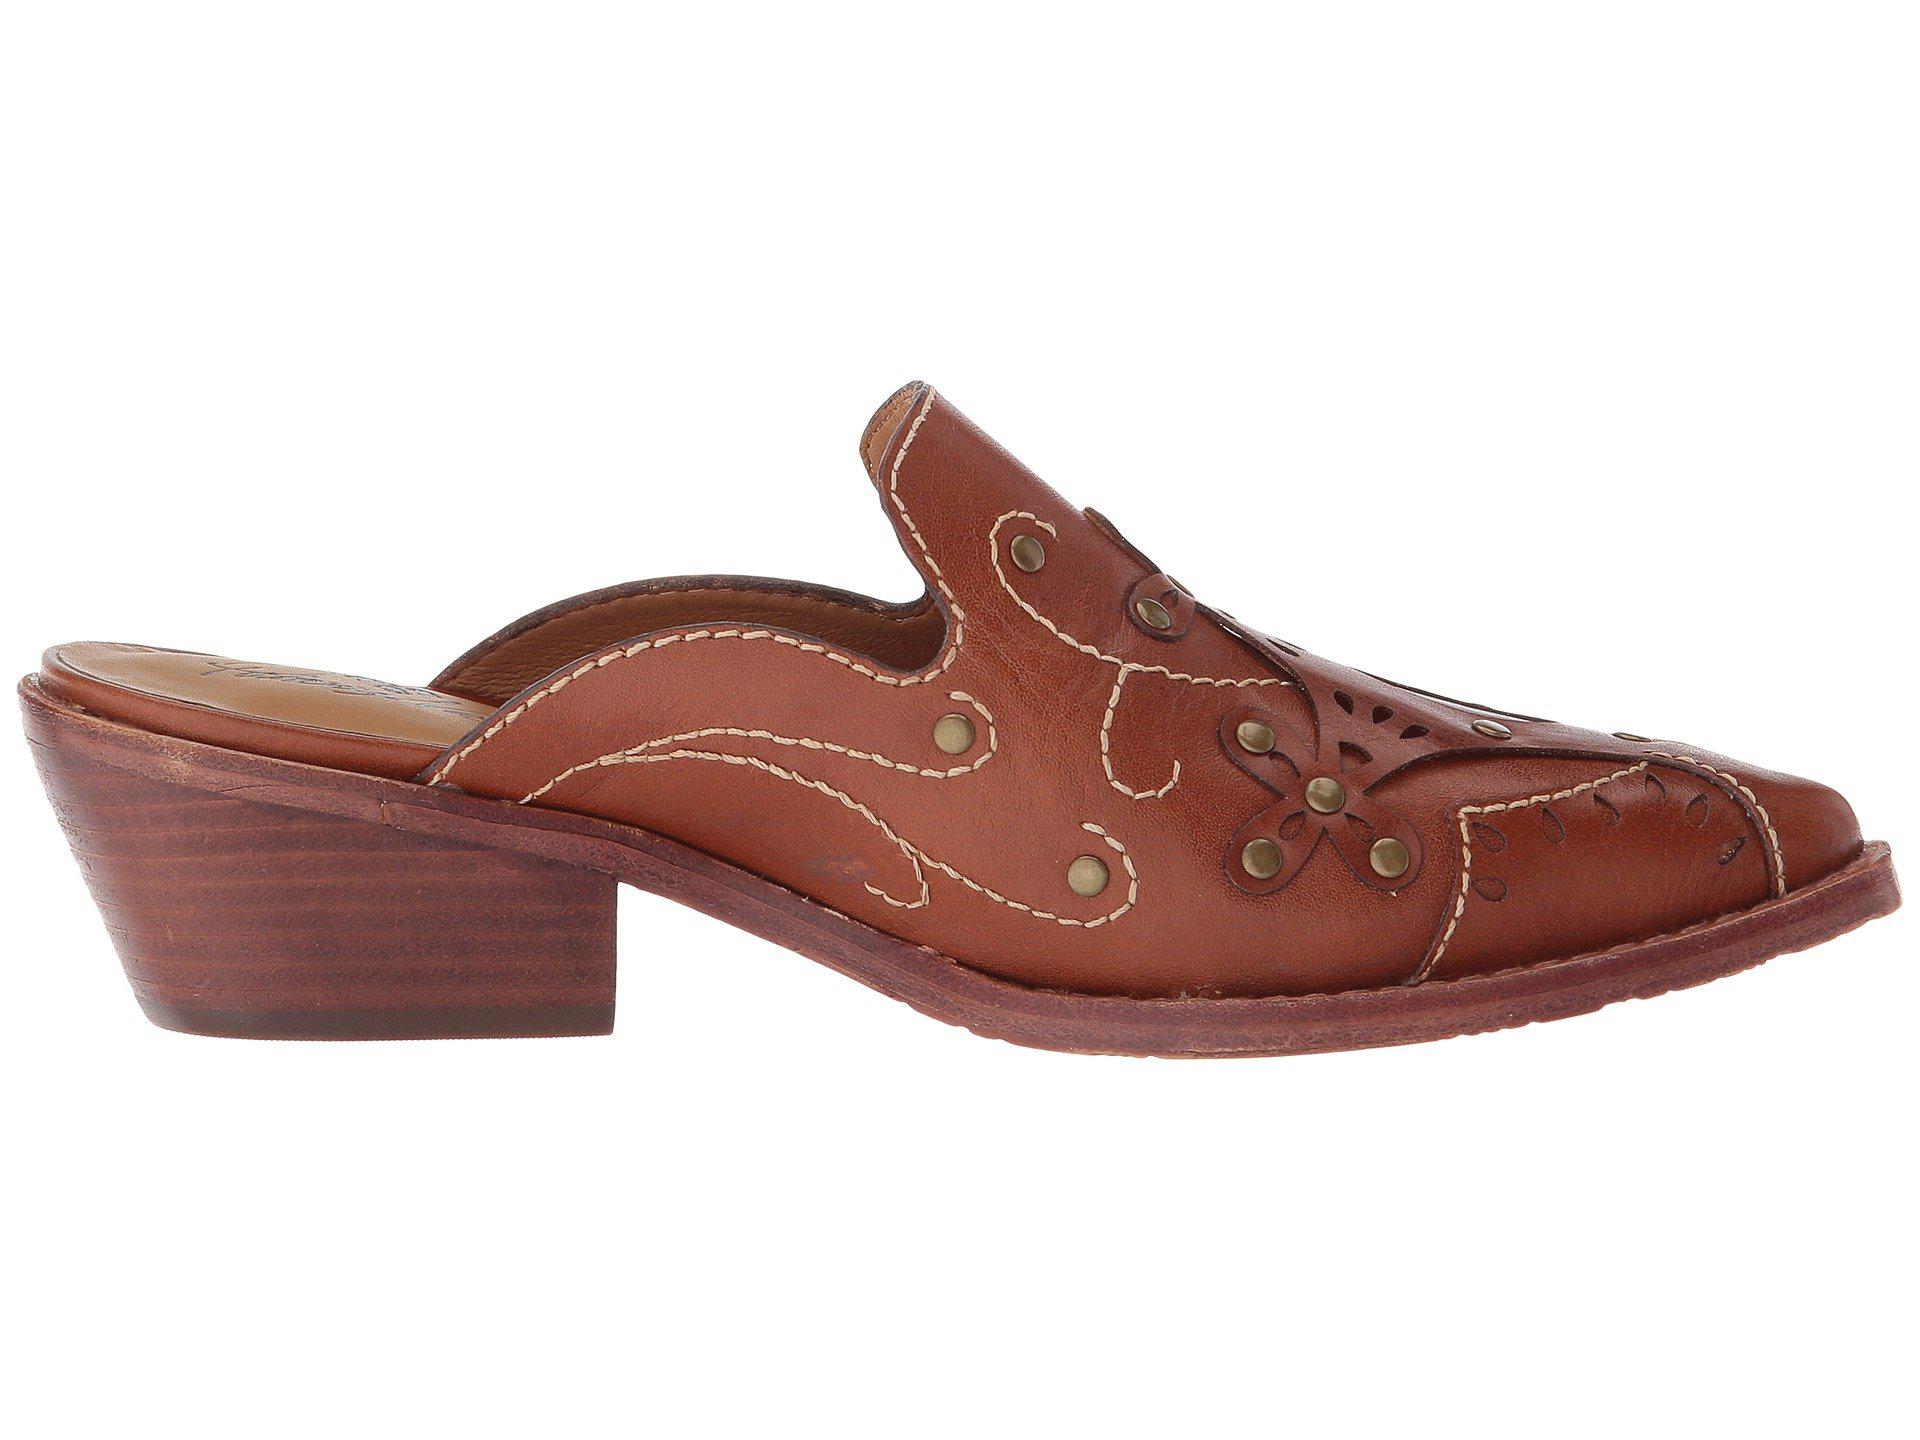 Patricia Nash Benedetta (tan Leather) Women's Clog Shoes